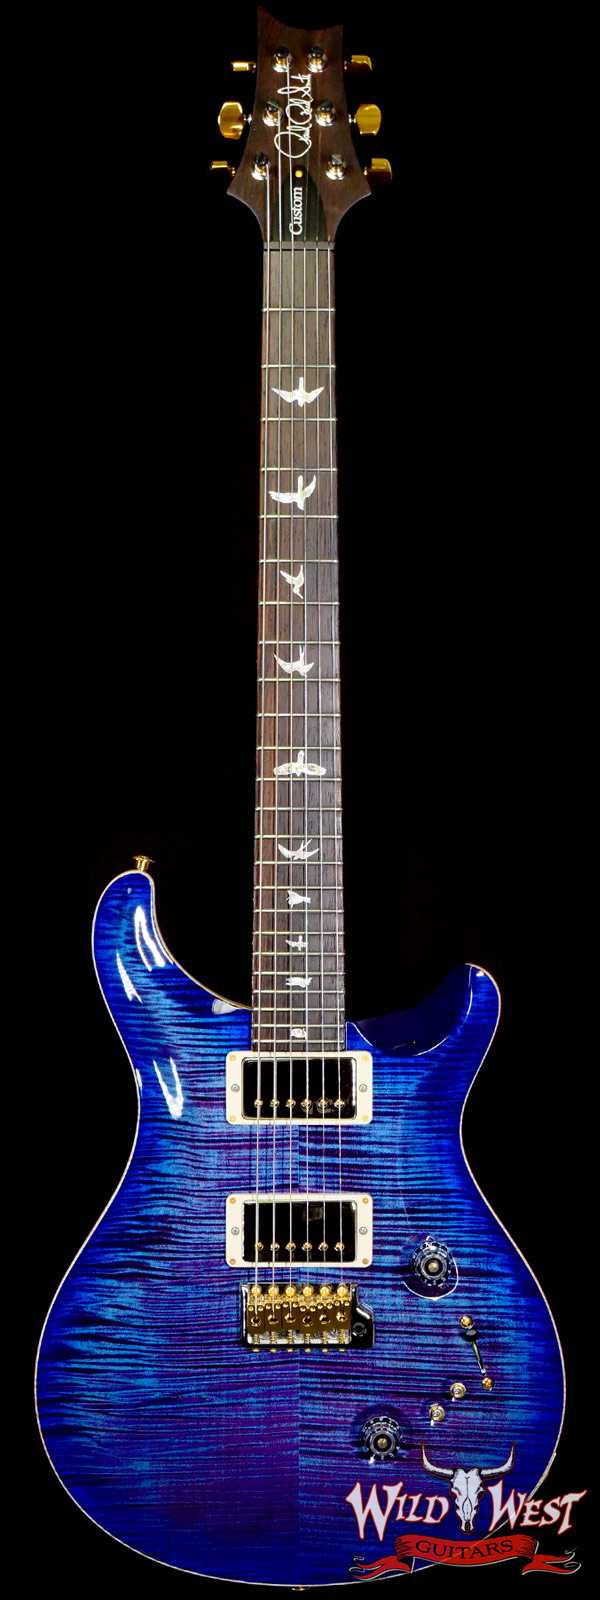 Paul Reed Smith PRS Wood Library 10 Top Custom 24-08 Brazilian Rosewood Board Violet Blue Burst